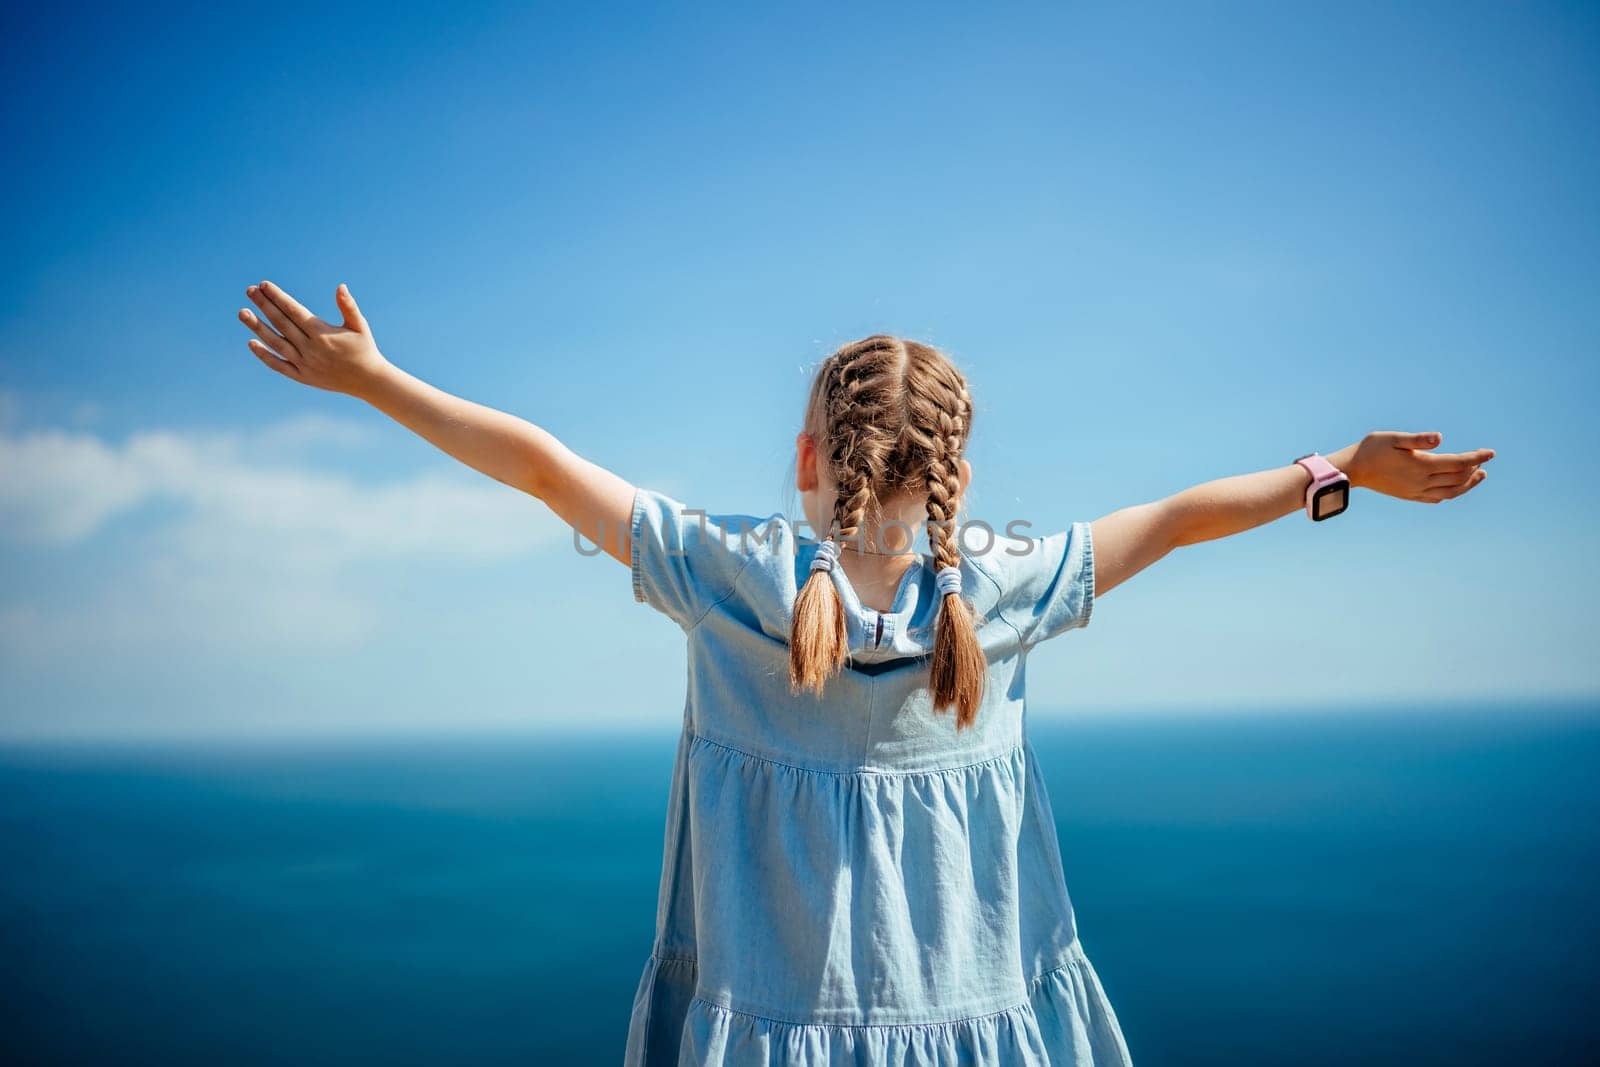 A young girl with pigtails is standing on a beach, looking out at the ocean. She is wearing a blue dress and has her arms outstretched, as if she is embracing the beauty of the ocean